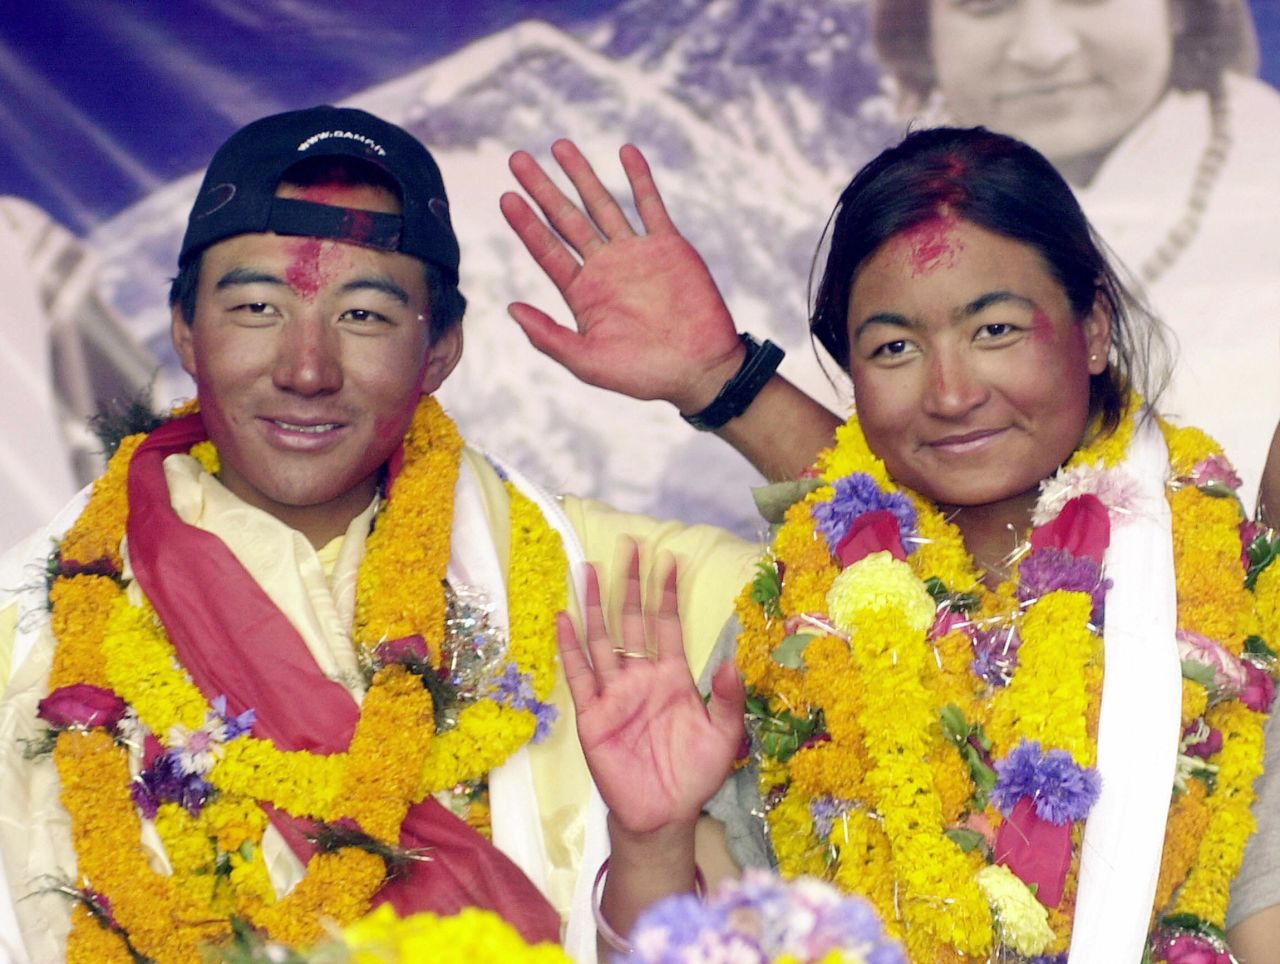 Pemba Dorje Sherpa and Moni Mulepati were the <a href="http://www.everestsummiteersassociation.org/index.php?option=com_content&view=category&layout=blog&id=24&Itemid=27" target="_blank" target="_blank">first people to get married</a> on Everest's summit, in March 2005.